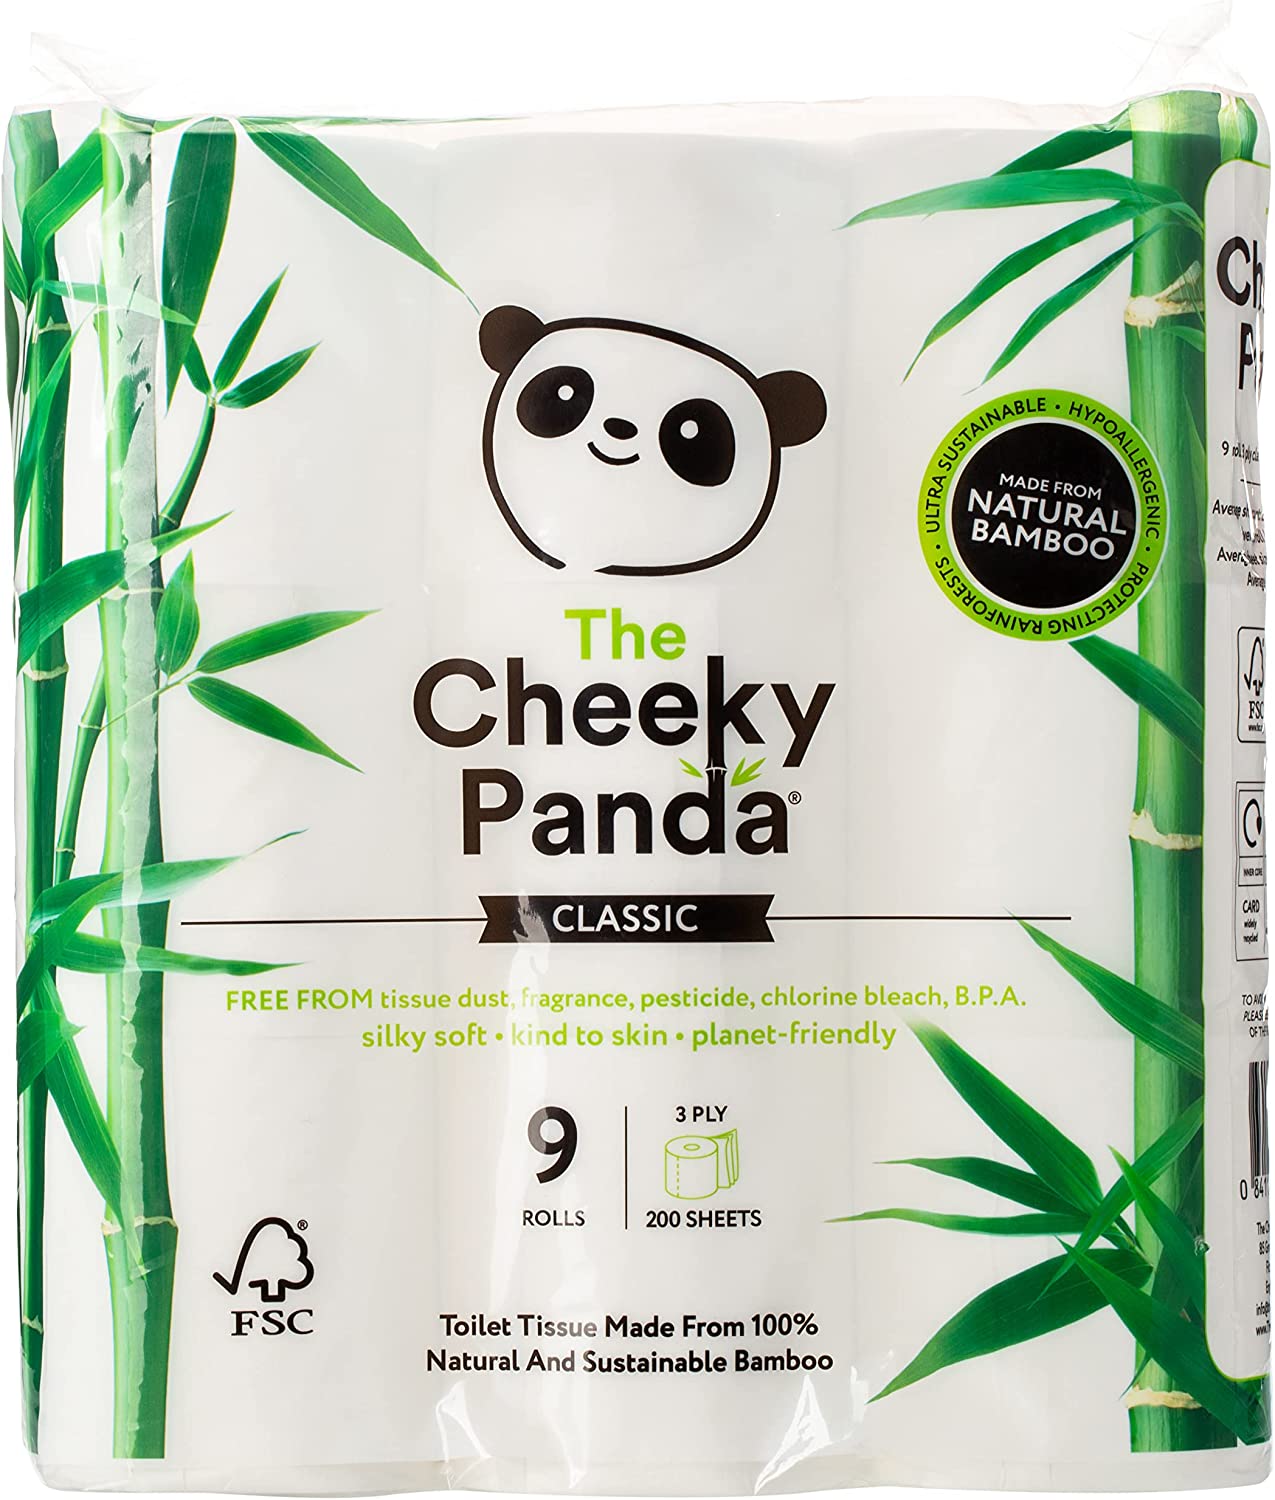 The Cheeky Panda Bamboo Toilet Roll Tissue Paper 9 Rolls 3ply RRP £9.60 CLEARANCE XL £8.99